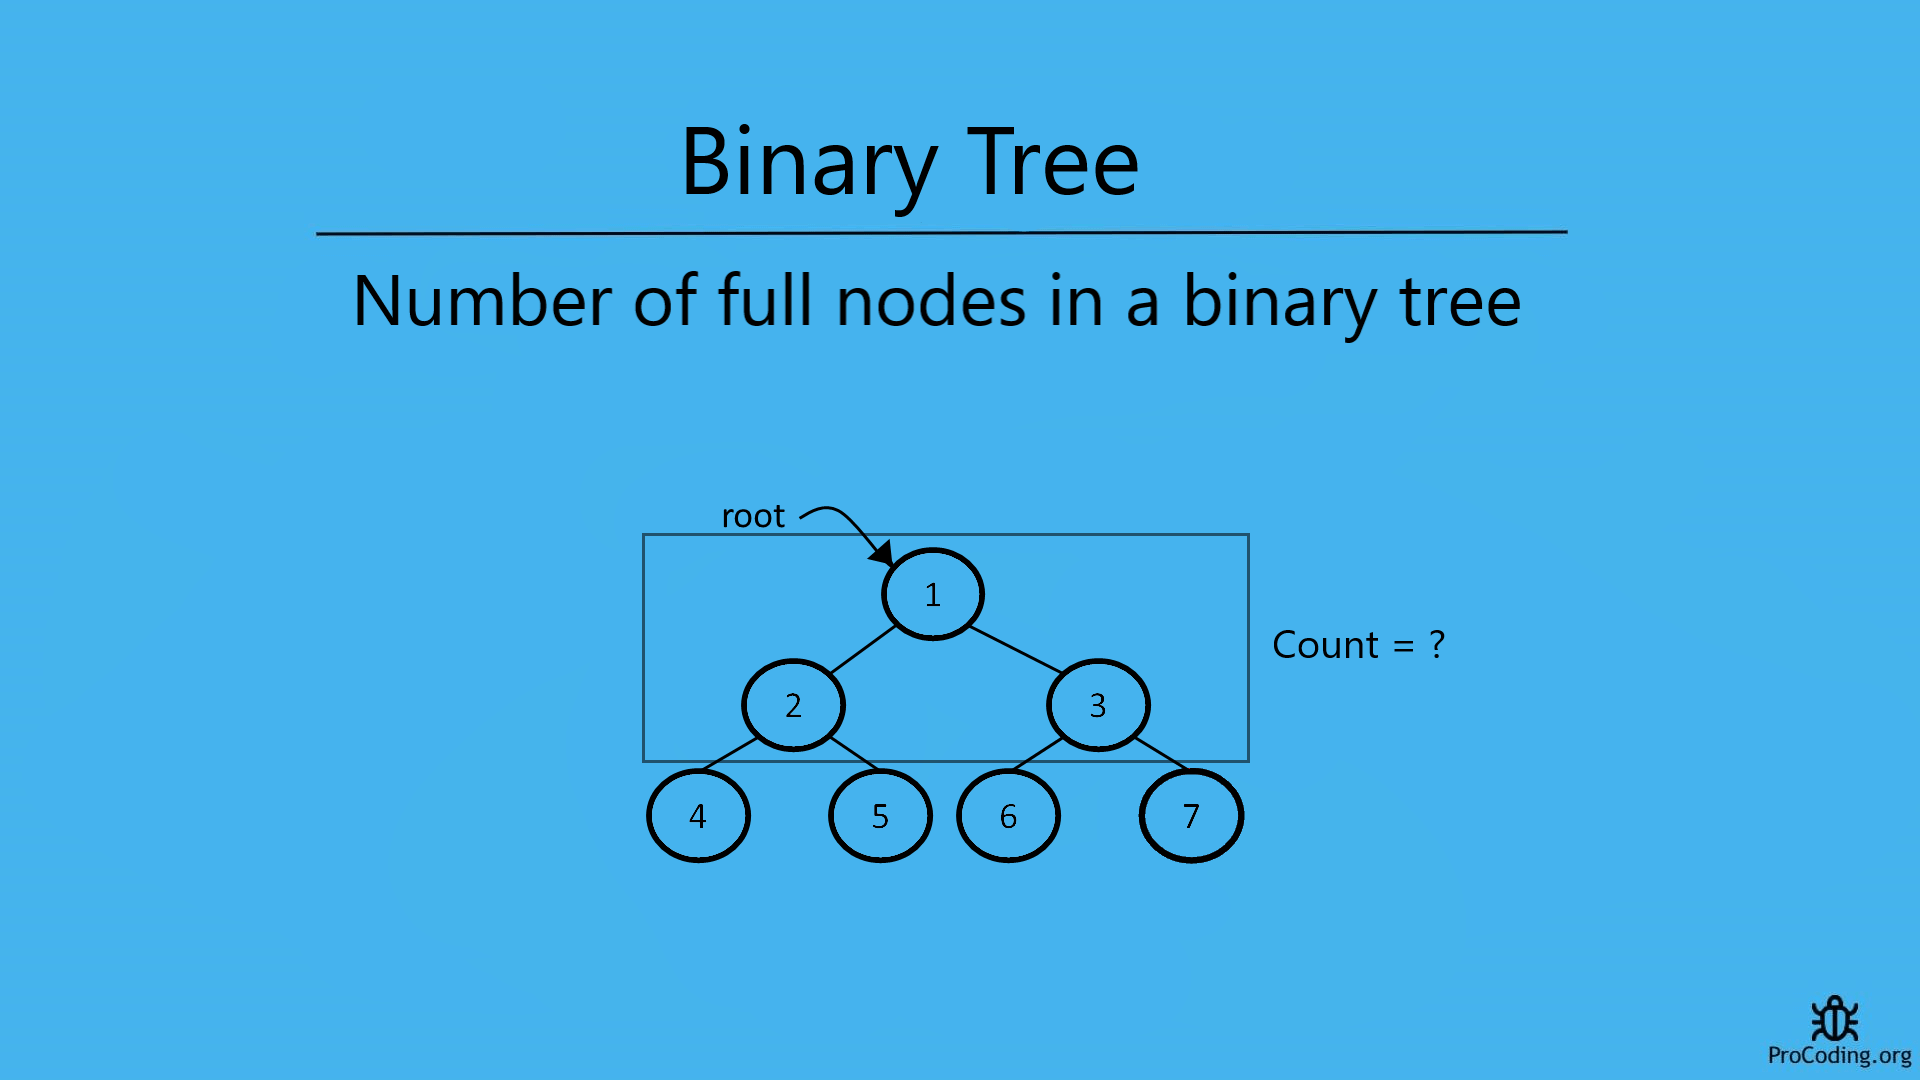 Number of full nodes in a binary tree